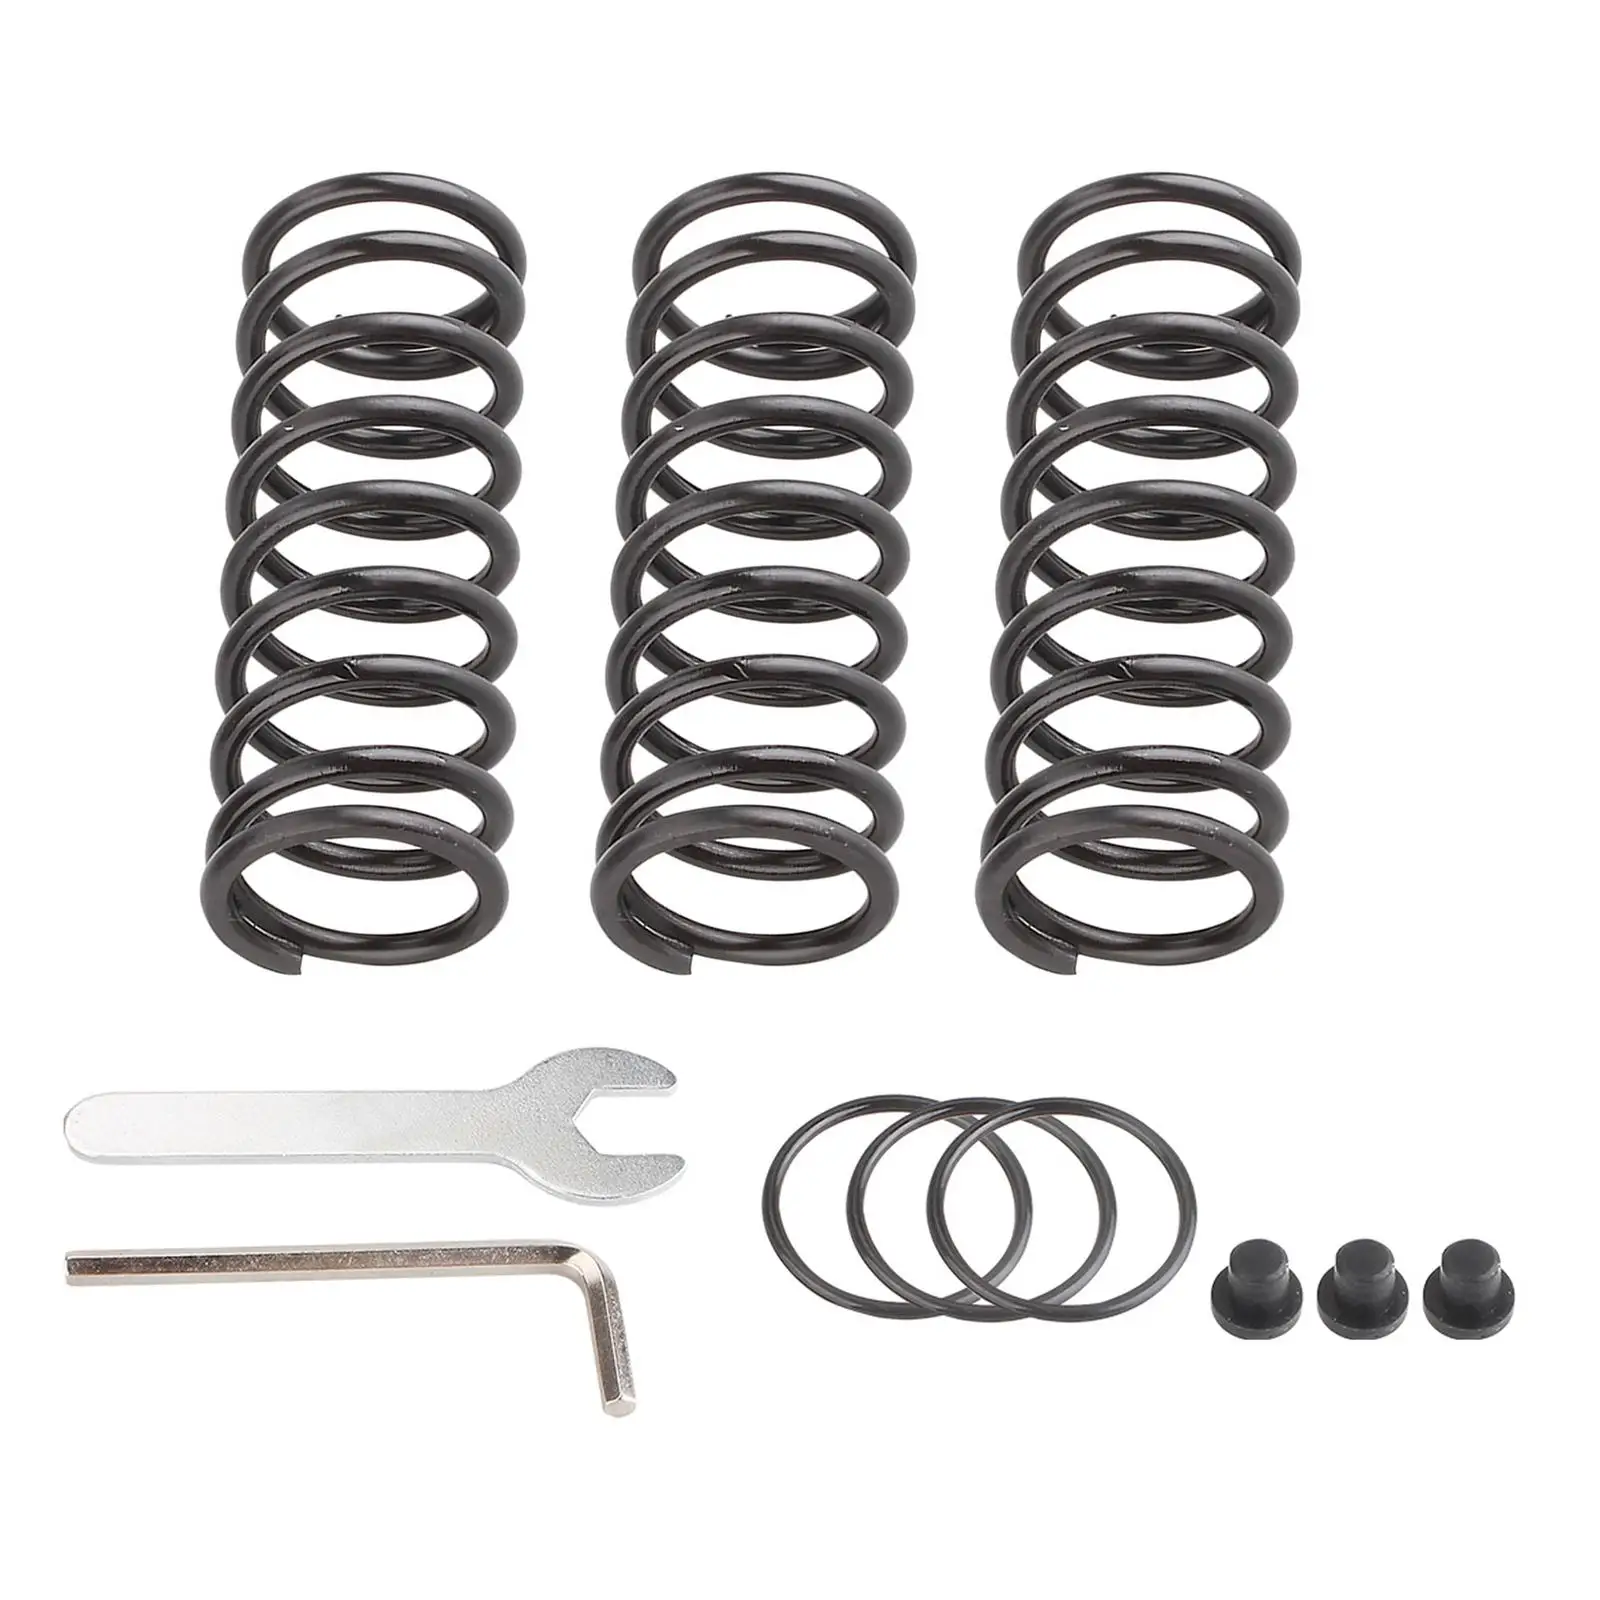 3x Pedal Spring Kit for G27 G29 G920 Easy to Install Fittings Steel Durable Upgrade